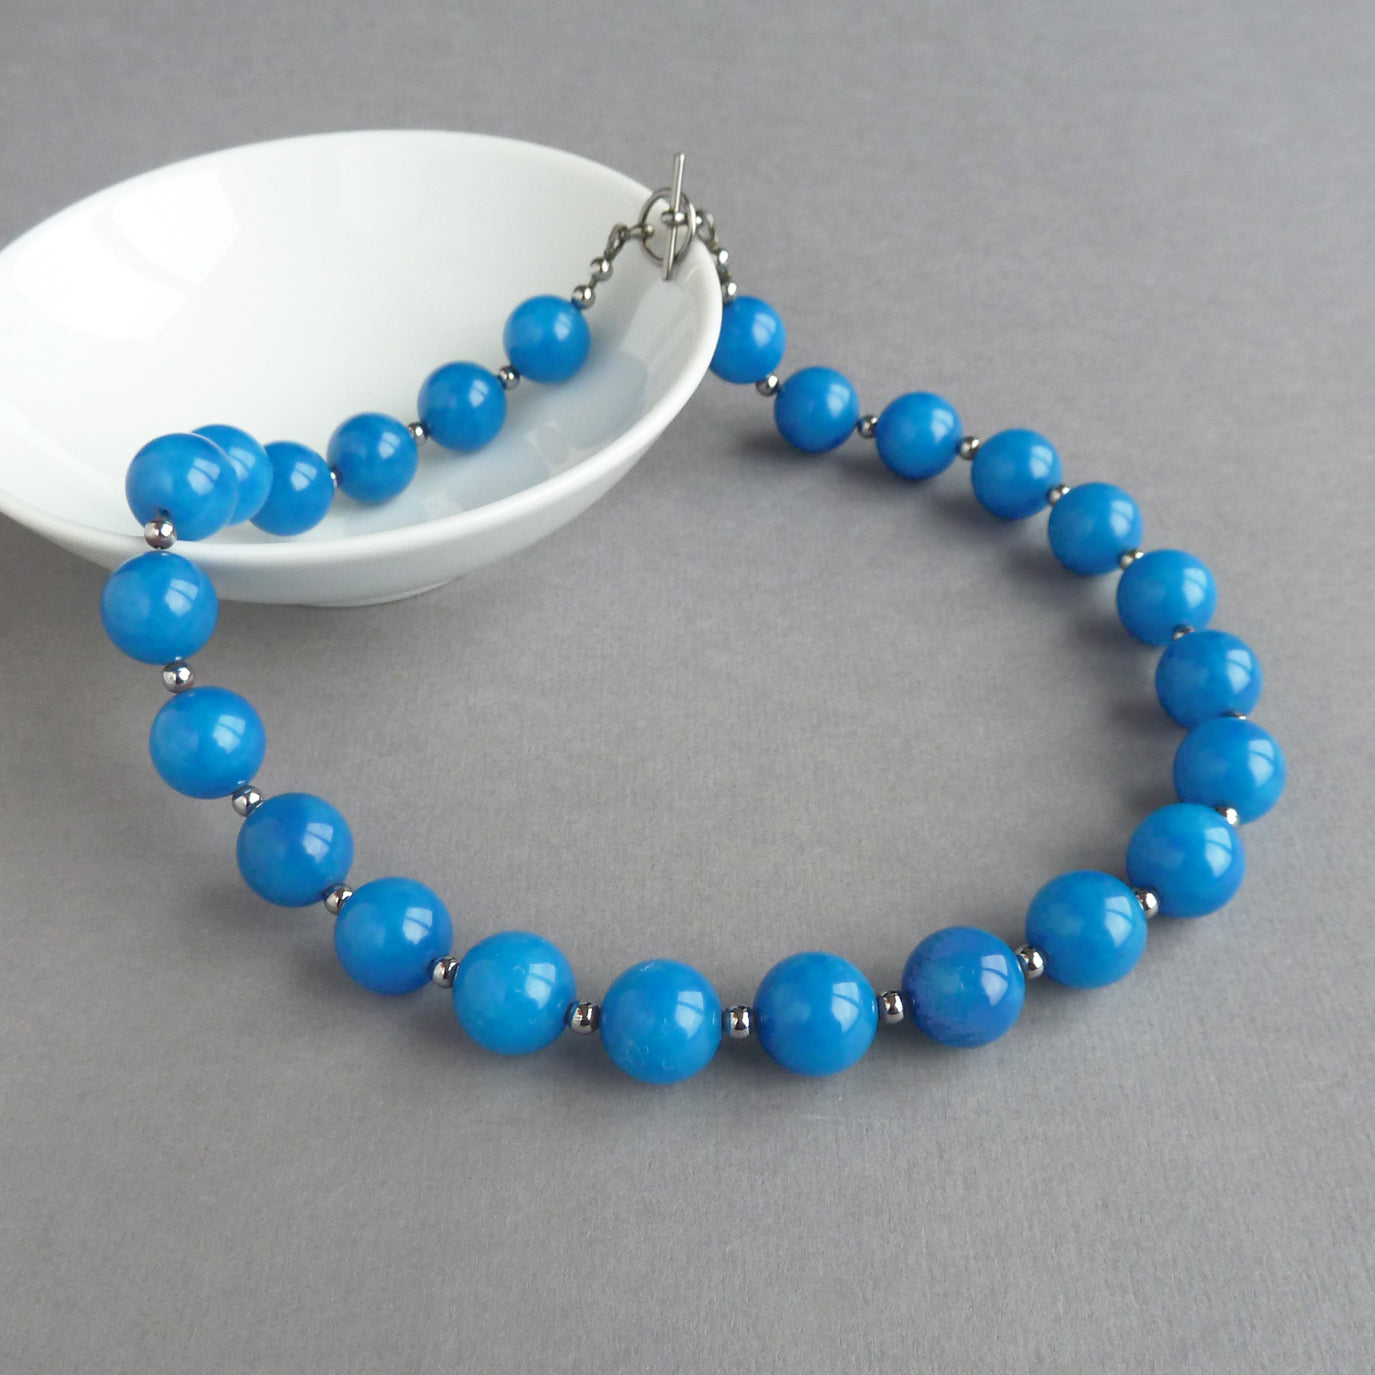 Chunky cerulean blue necklace